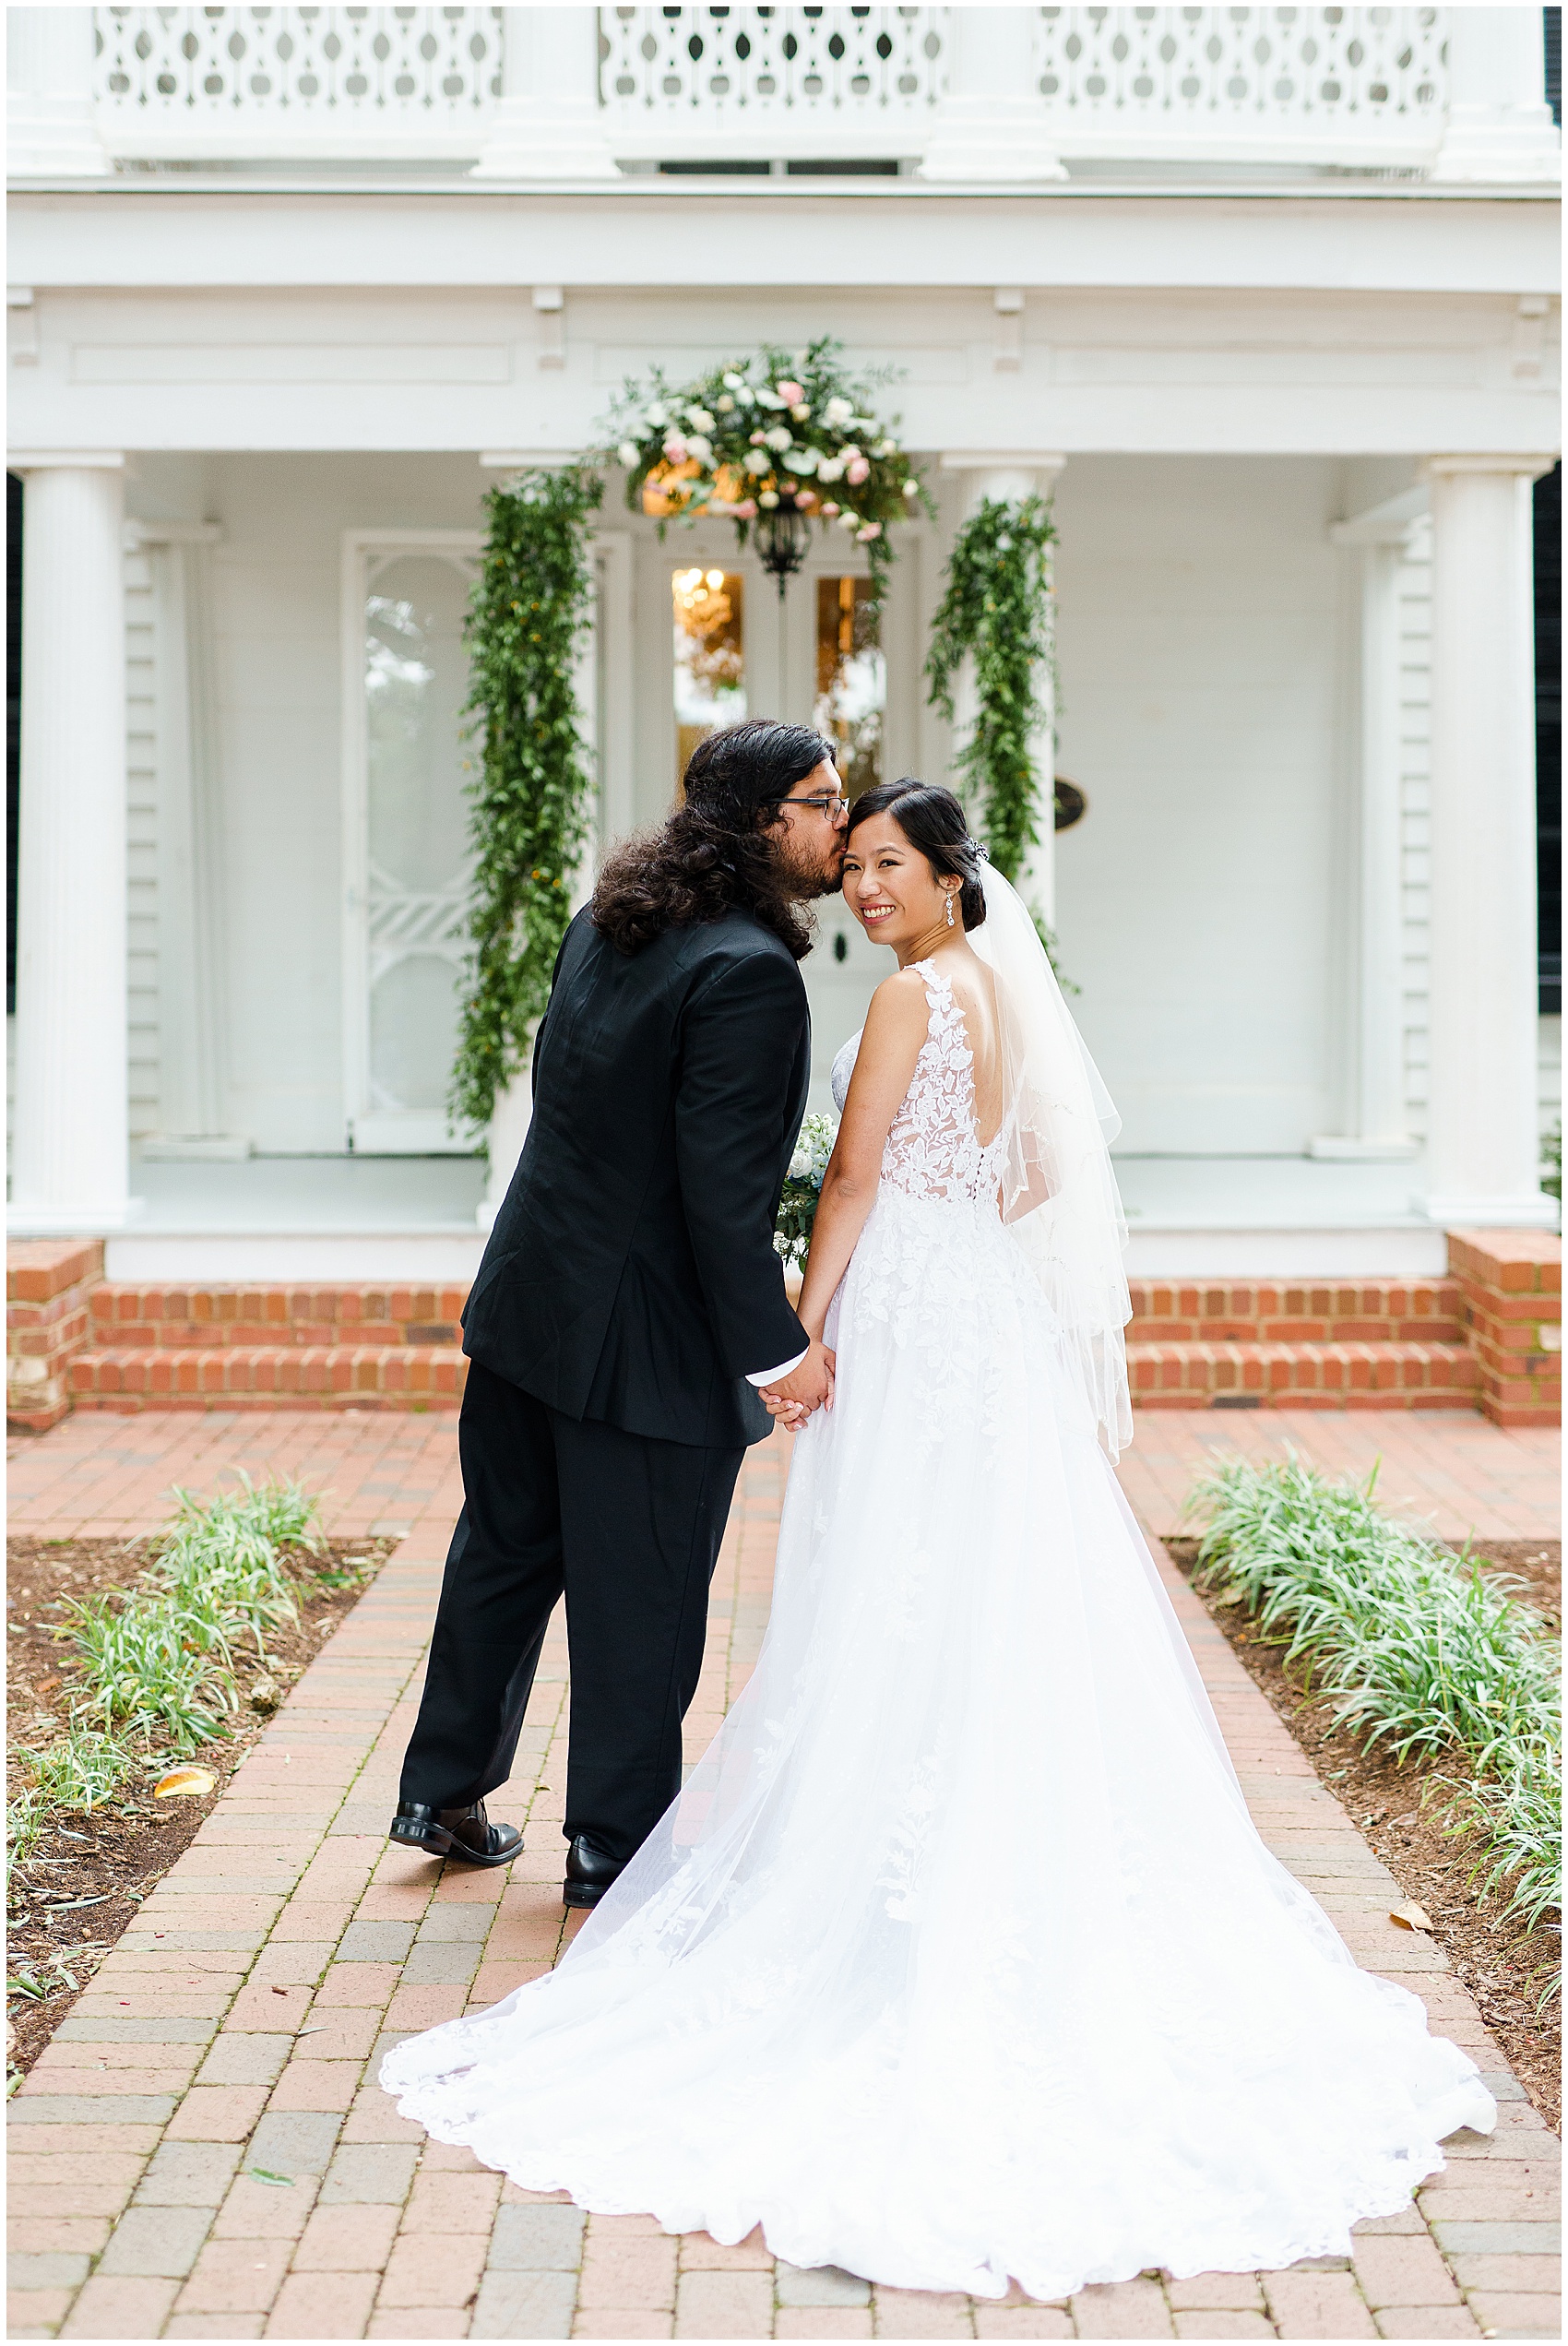 Groom kissing bride on the cheek in front of the A Stunning and Historic Leslie Alford Mims House Wedding Venue